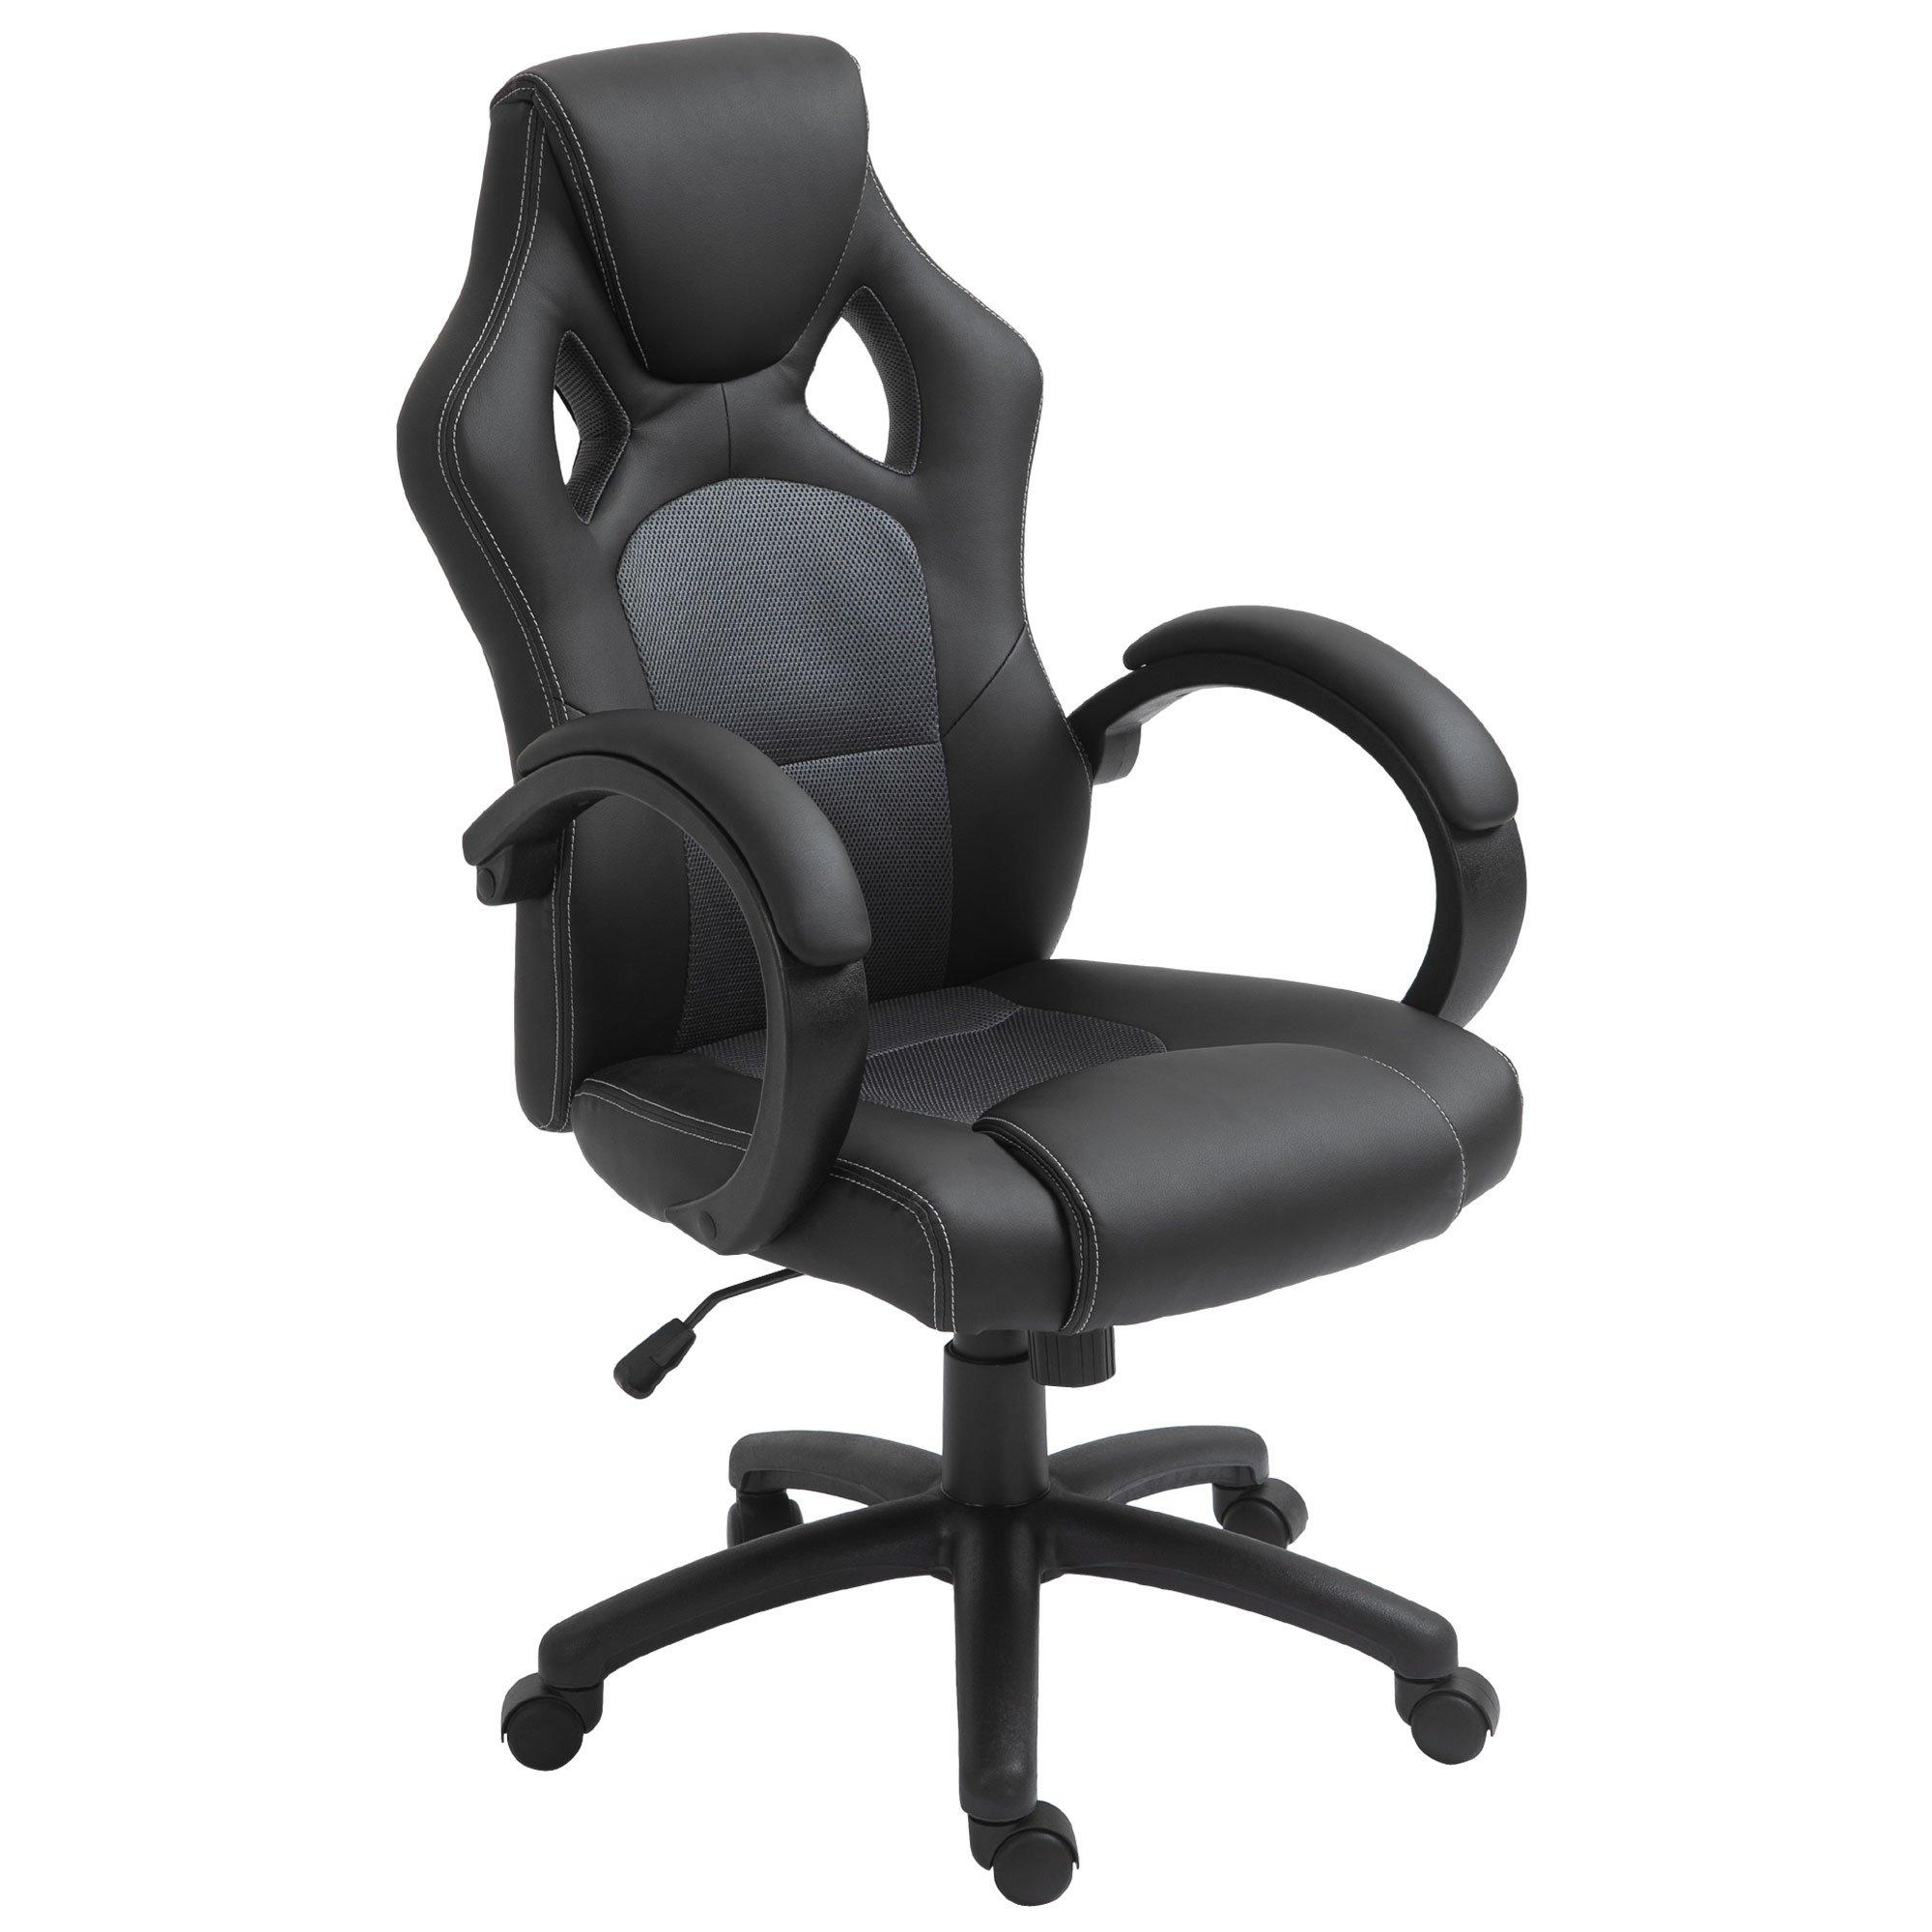 Executive Racing Swivel Gaming Office Chair PU Leather Computer Desk